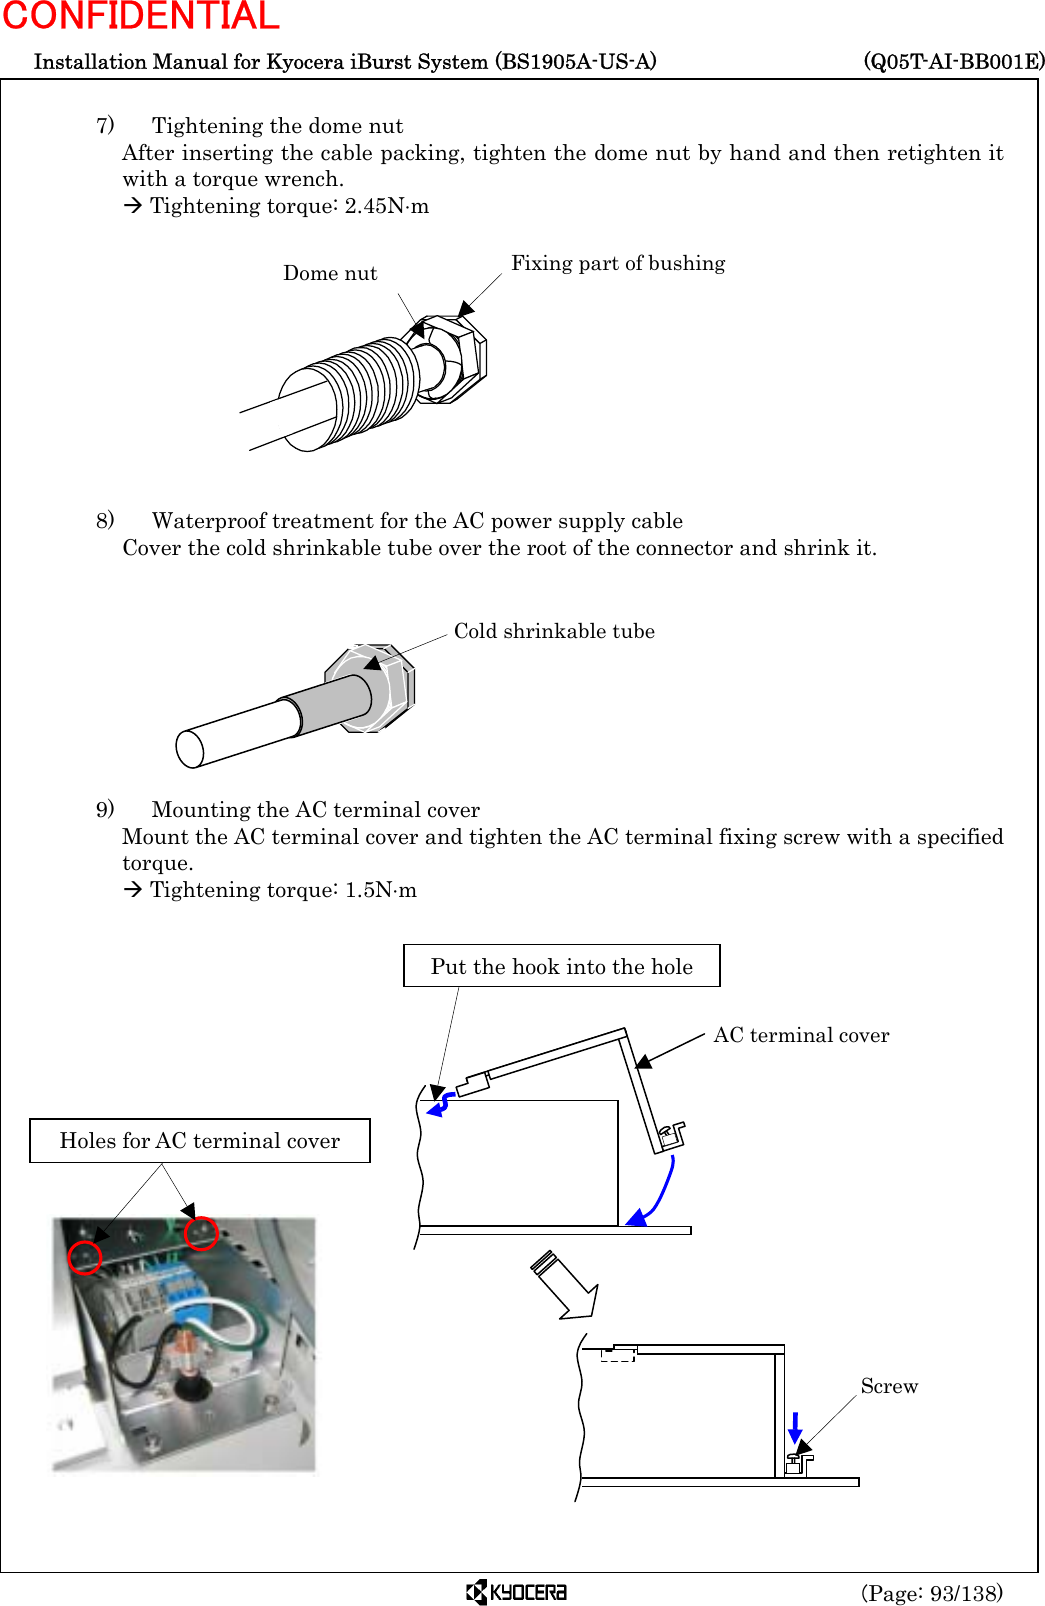  Installation Manual for Kyocera iBurst System (BS1905A-US-A)     (Q05T-AI-BB001E) (Page: 93/138) CONFIDENTIAL  7)    Tightening the dome nut After inserting the cable packing, tighten the dome nut by hand and then retighten it with a torque wrench. Æ Tightening torque: 2.45N⋅m            8)    Waterproof treatment for the AC power supply cable Cover the cold shrinkable tube over the root of the connector and shrink it.          9)    Mounting the AC terminal cover   Mount the AC terminal cover and tighten the AC terminal fixing screw with a specified torque. Æ Tightening torque: 1.5N⋅m              Dome nut  Fixing part of bushing Cold shrinkable tube Holes for AC terminal cover Screw AC terminal cover Put the hook into the hole 